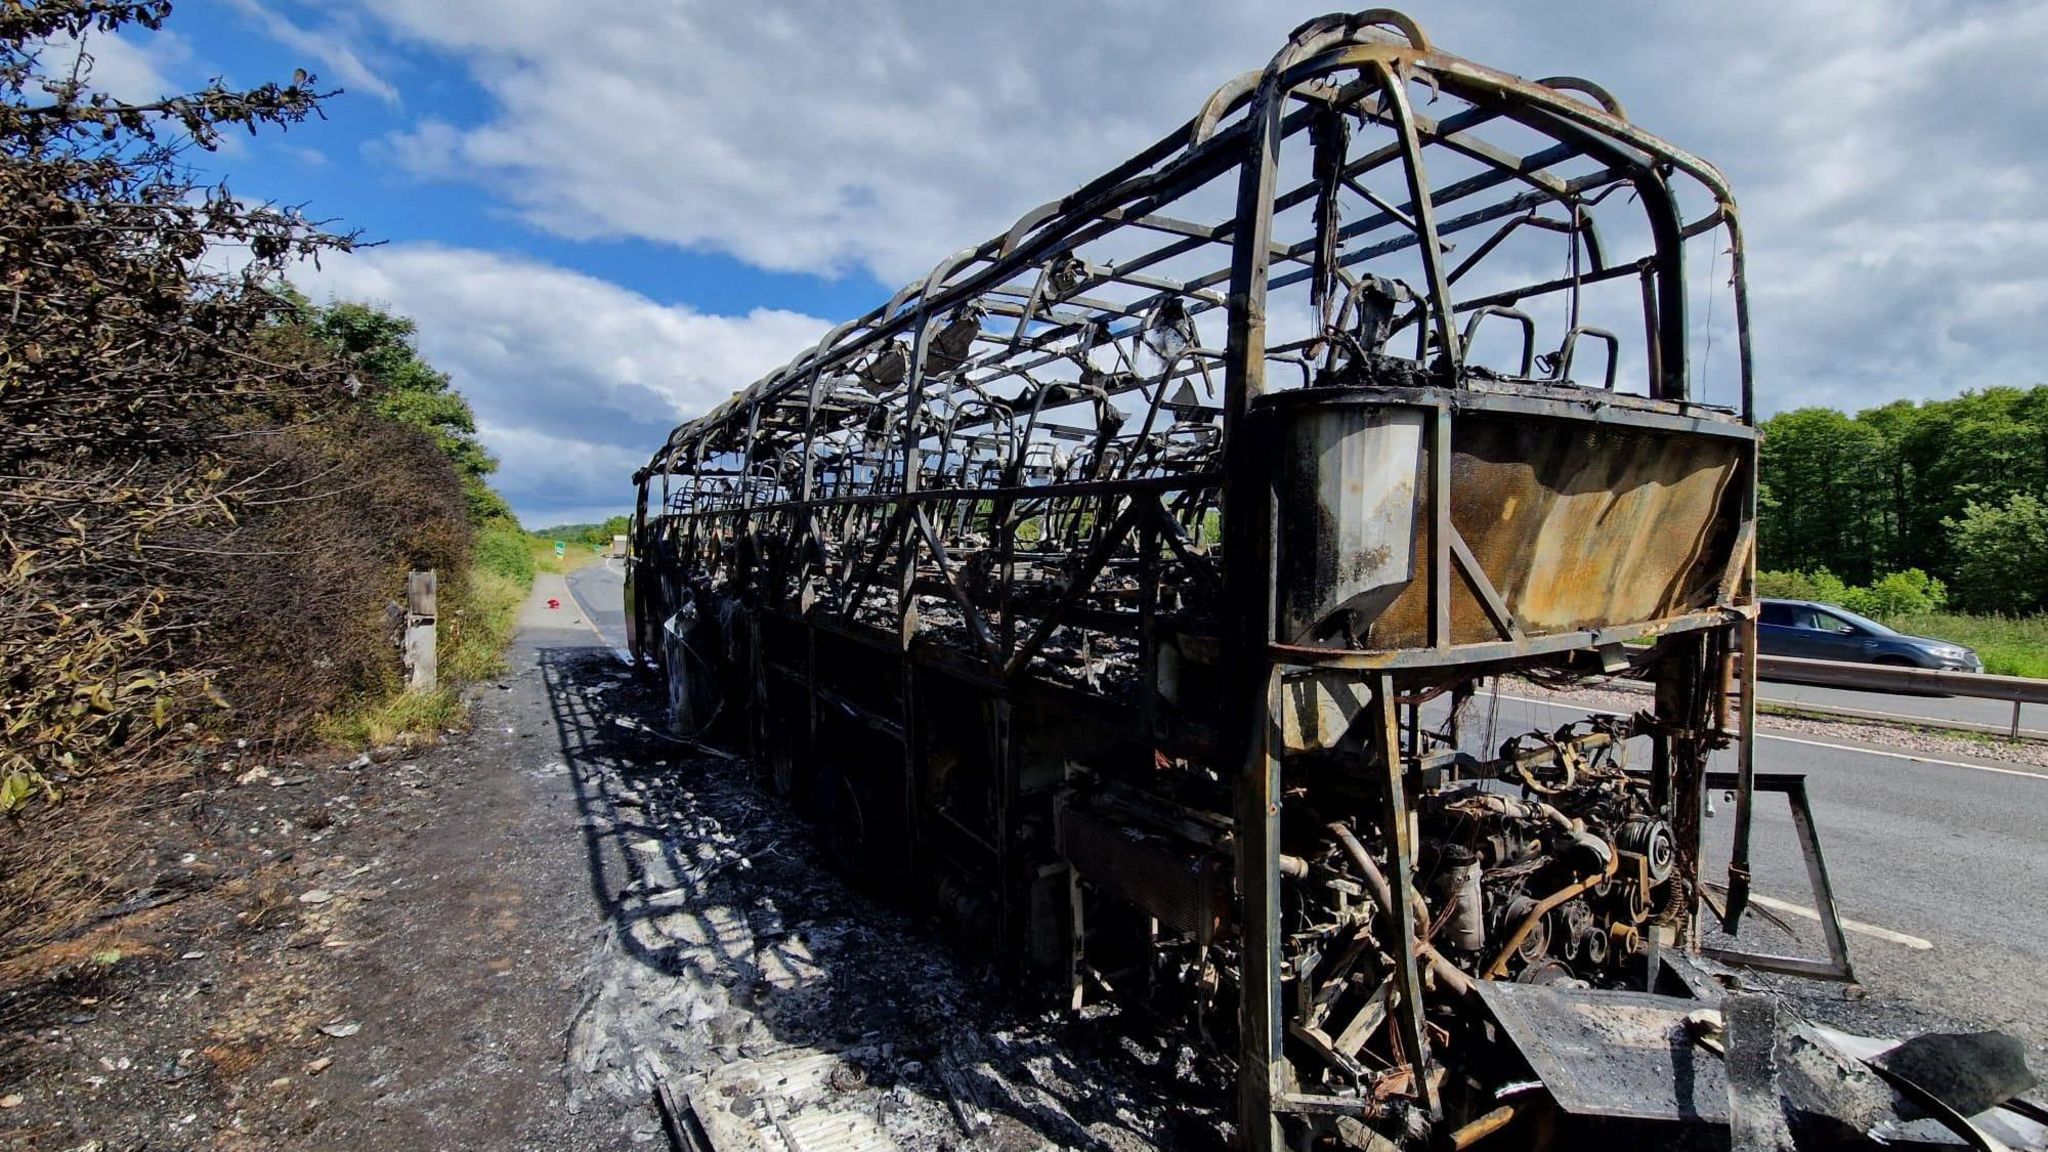 The gutted shell of a coach after a fire